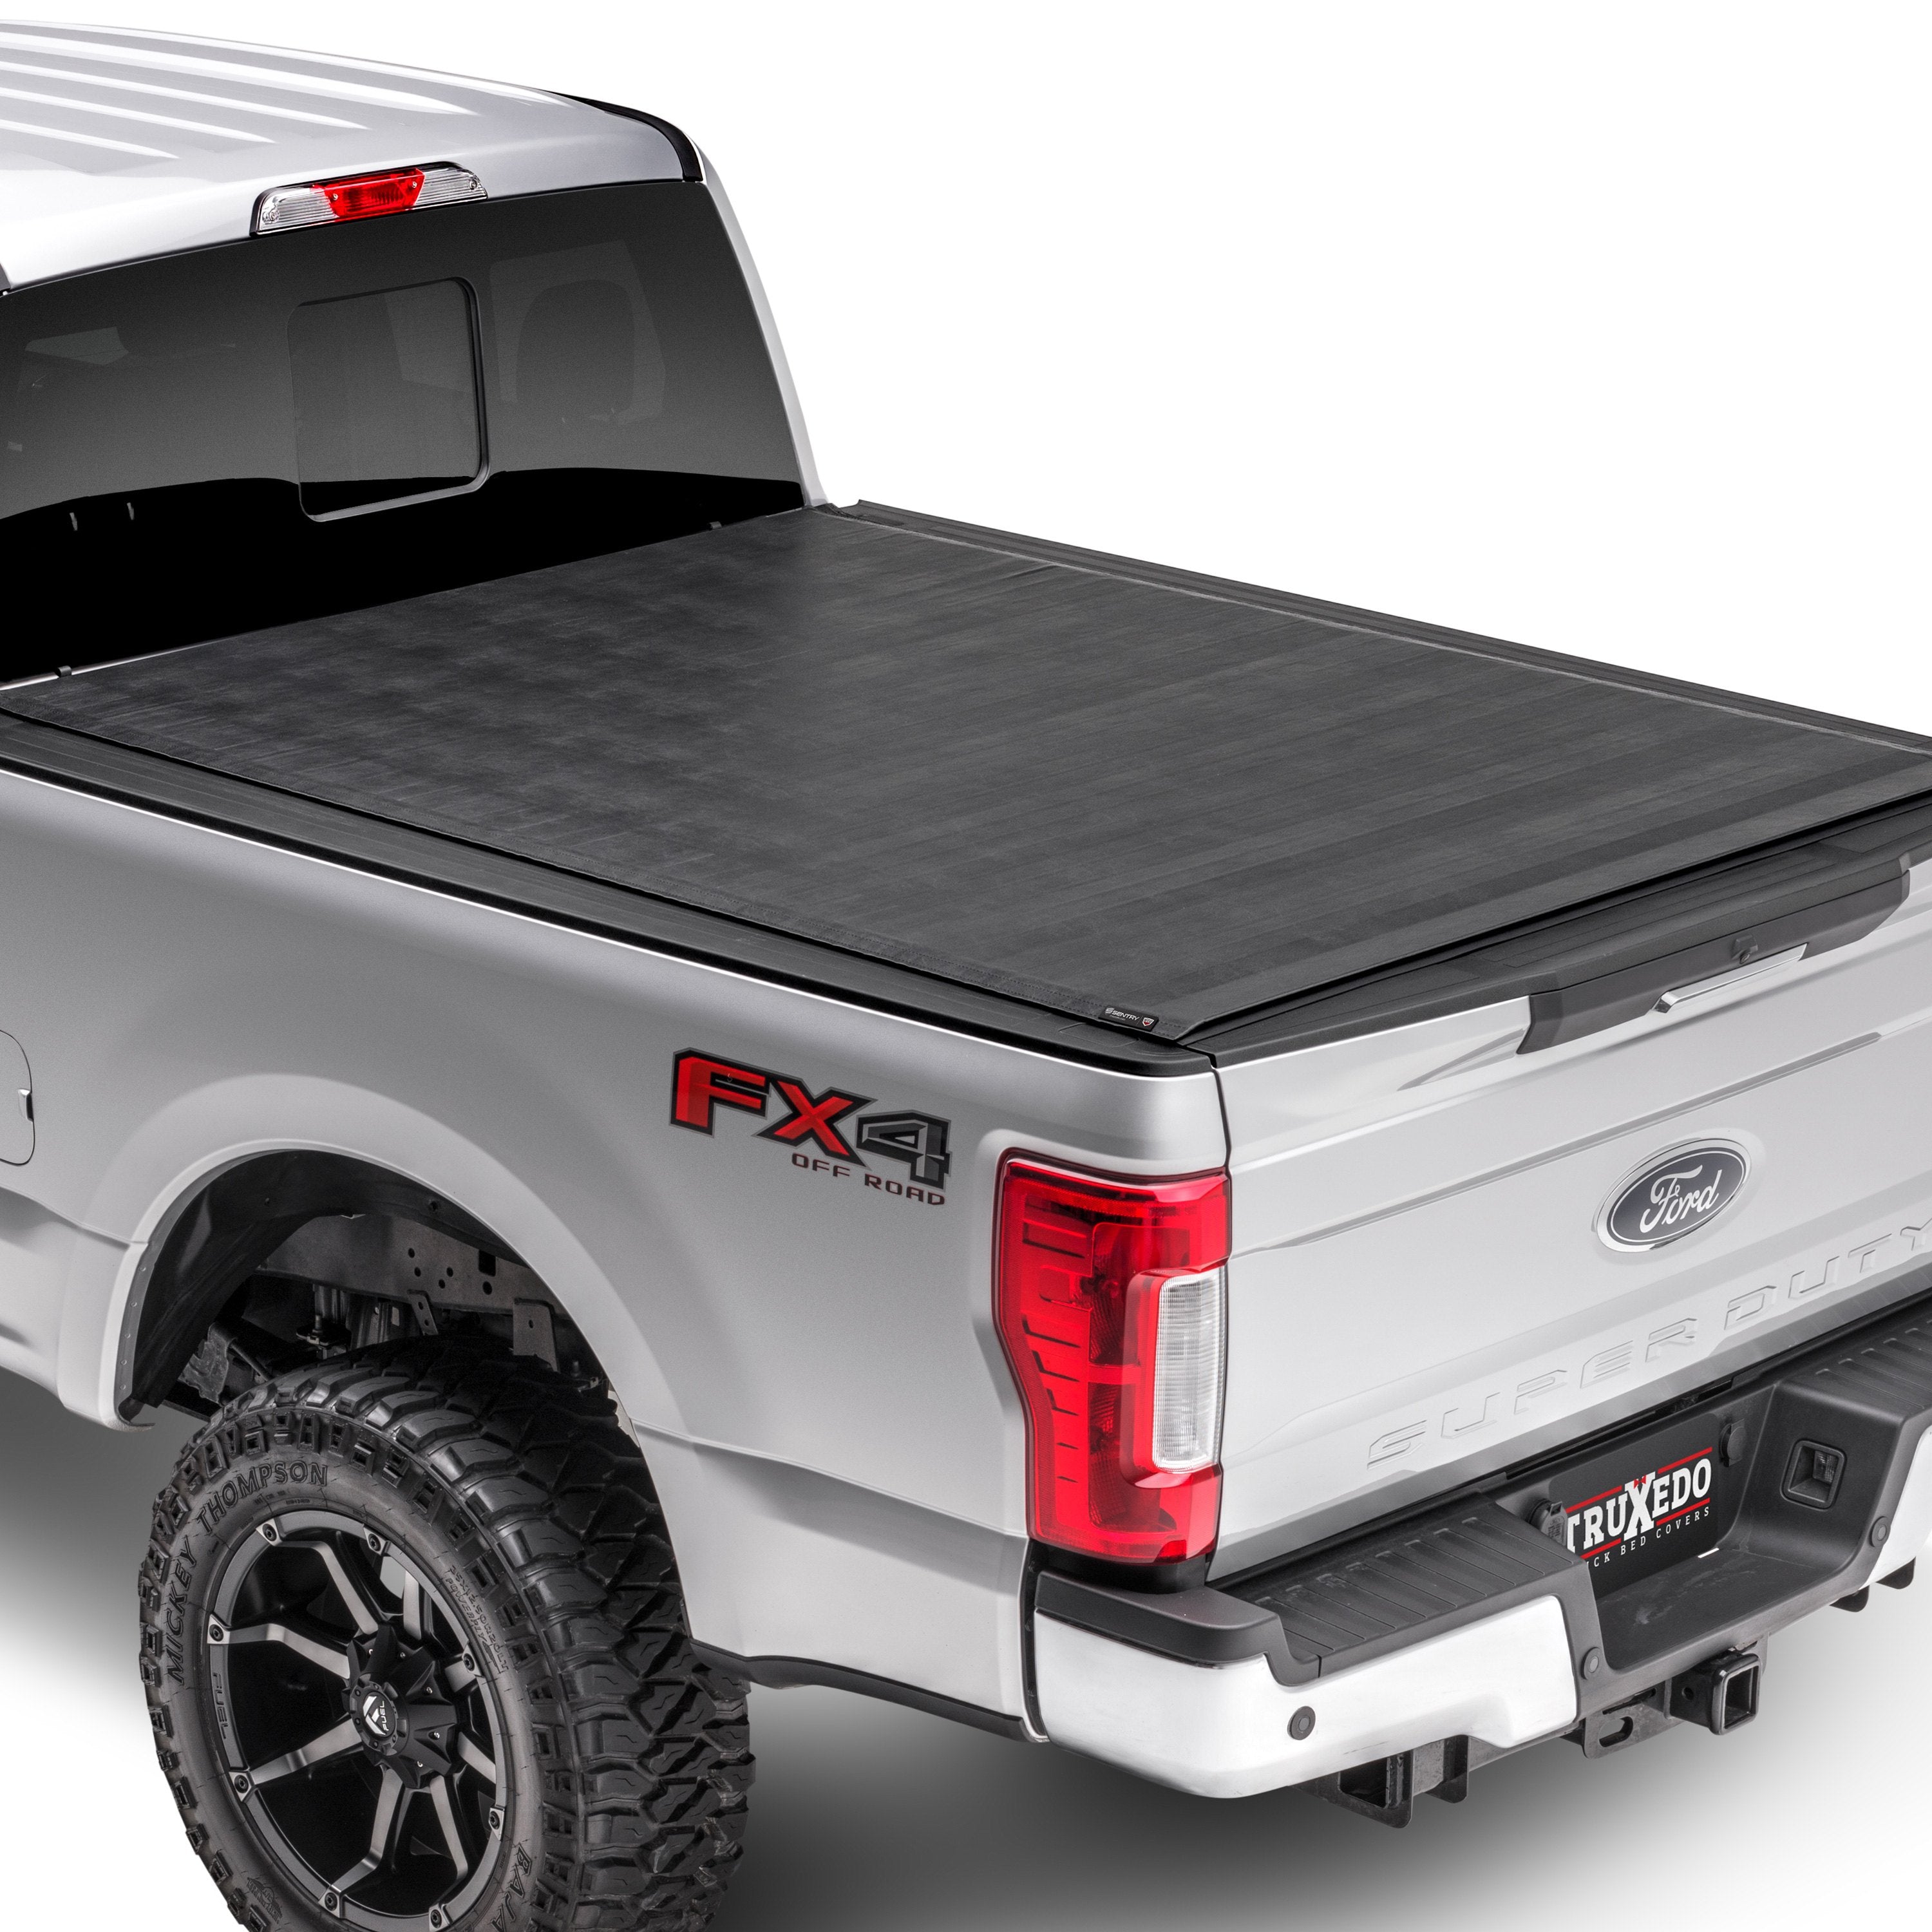 Truxedo Sentry Hard Roll Up Tonneau Cover For Ford F150 2009-2014 1598101